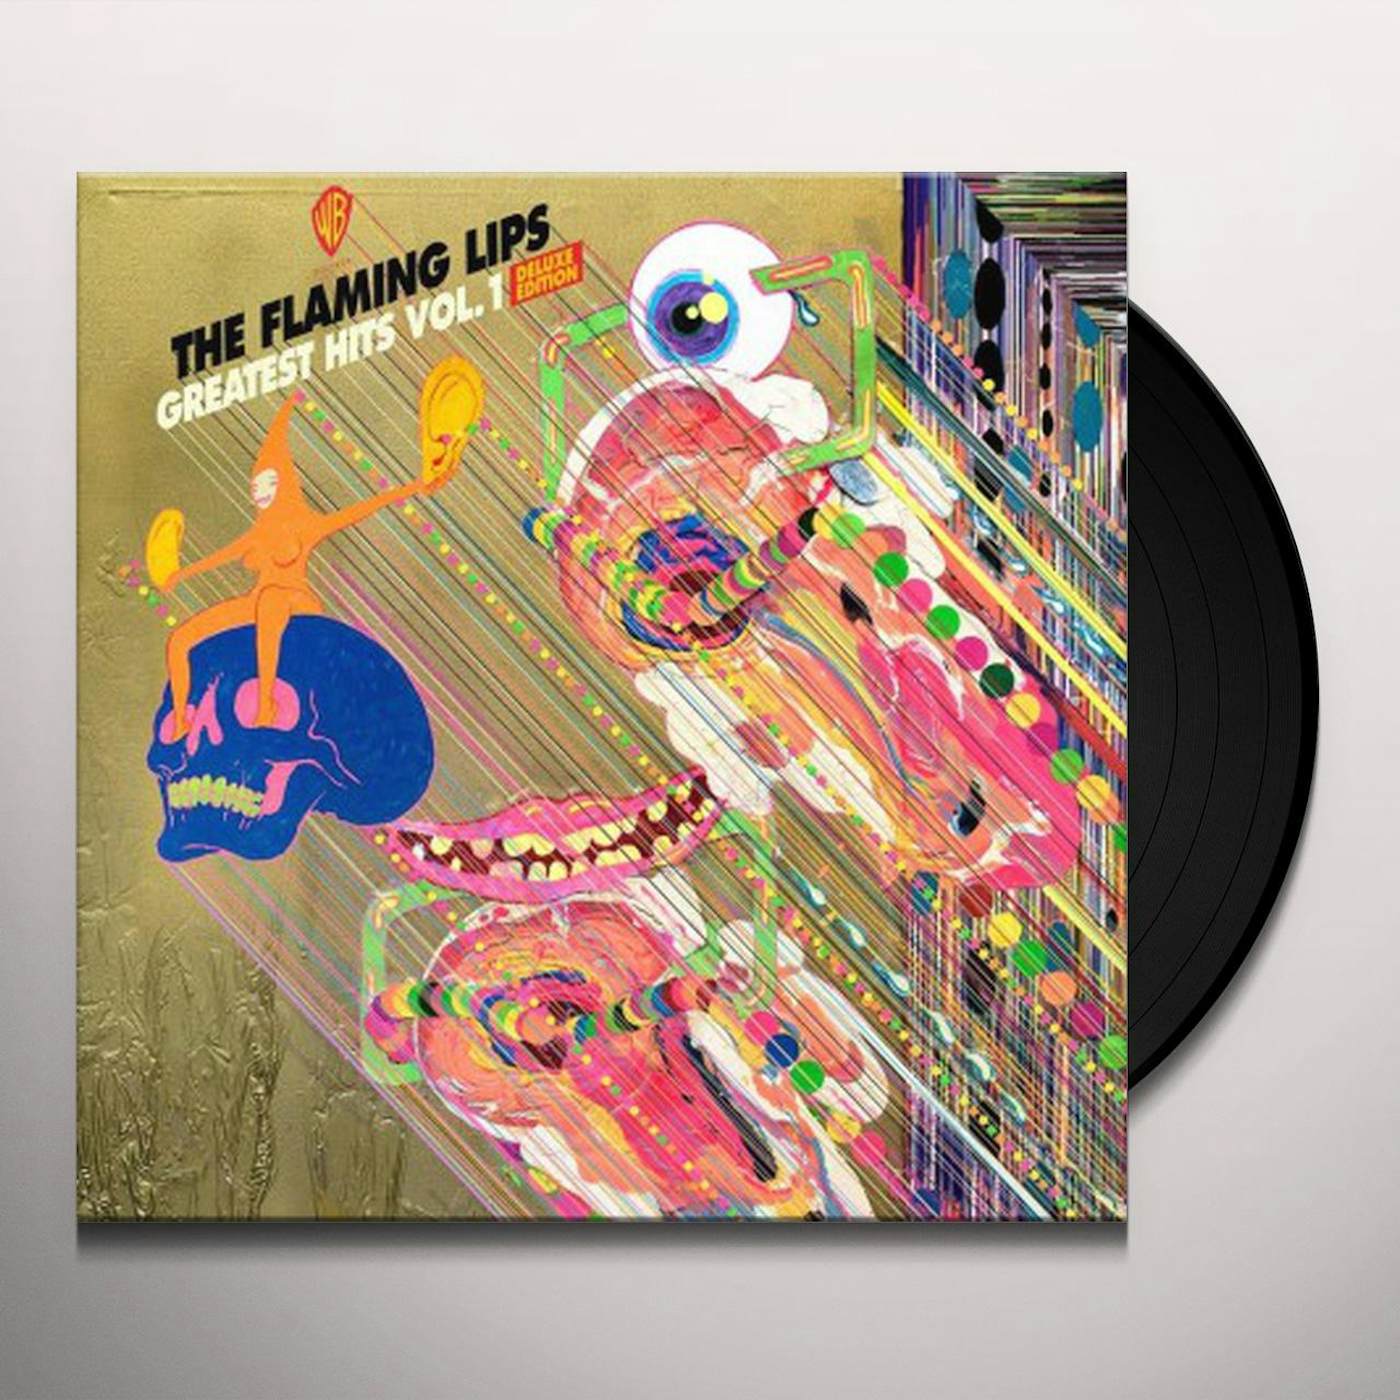 The Flaming Lips GREATEST HITS 1 Vinyl Record